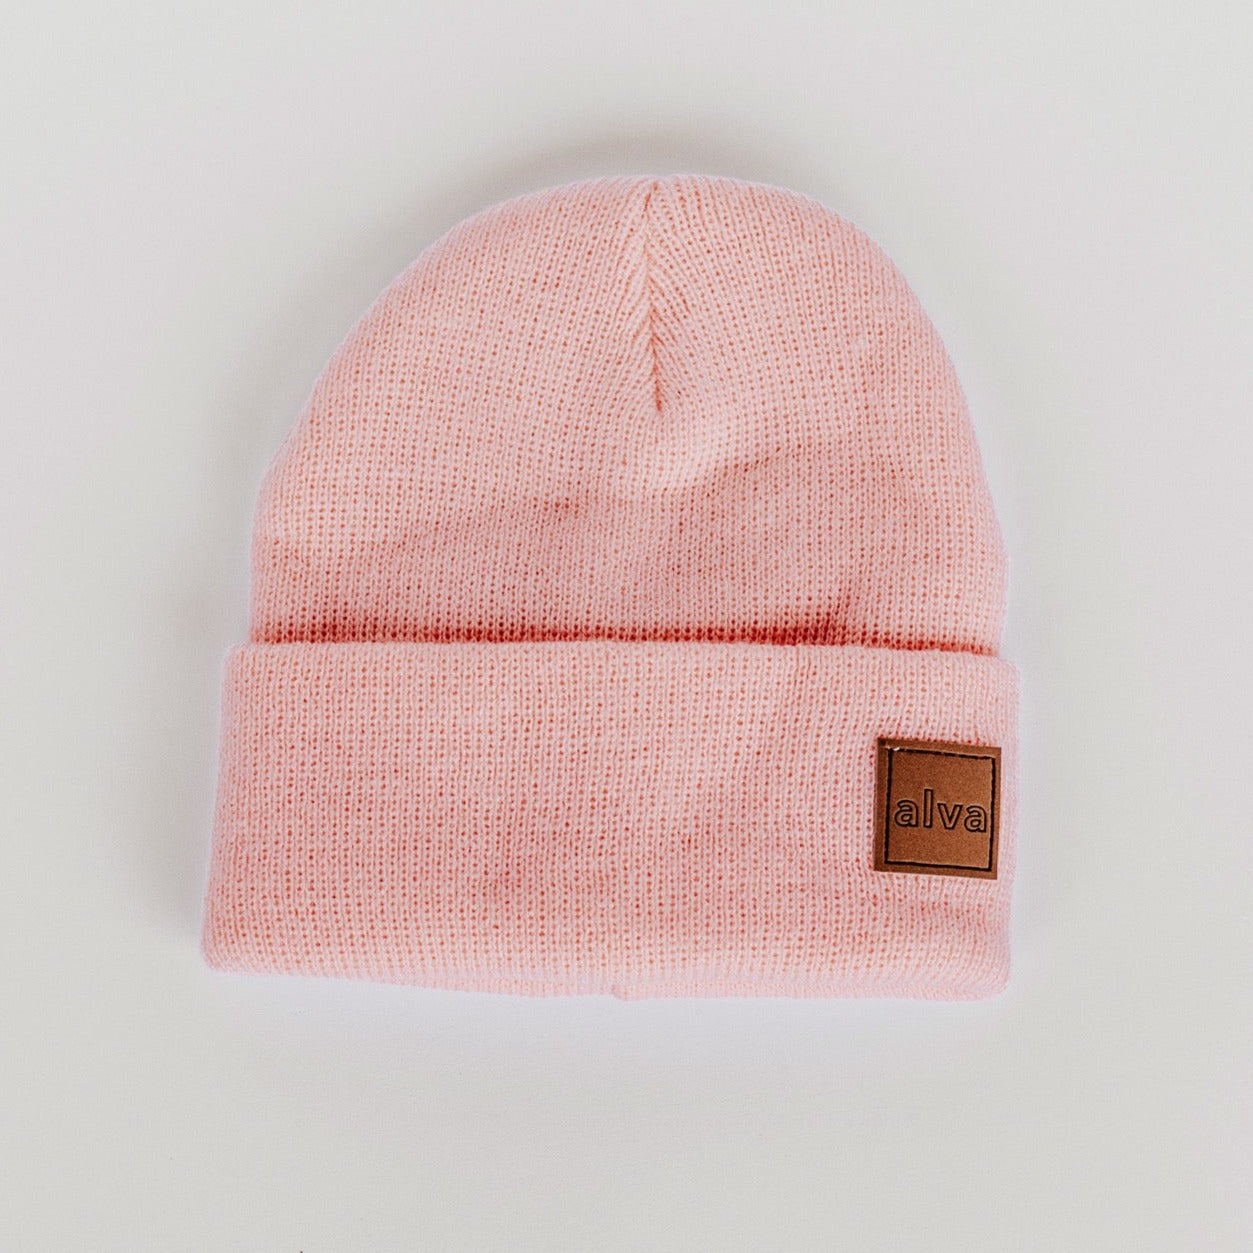 A light pink colored ribbed baby beanie with a small square faux leather patch that says "alva" on the bottom right corner. The hat is sitting on a white background